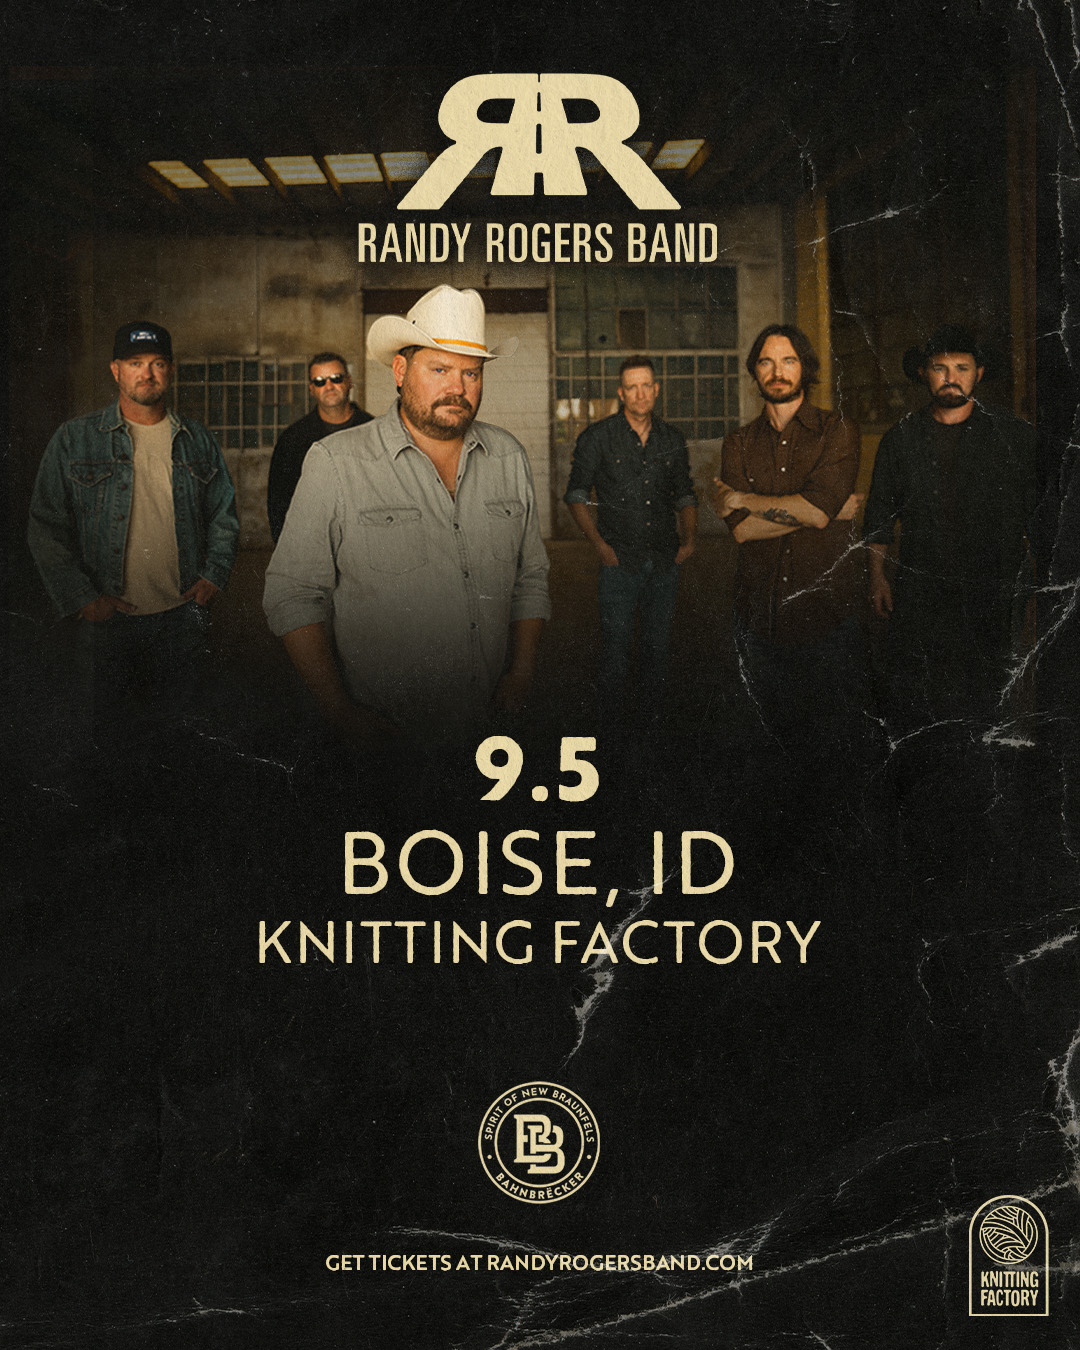 Randy Rogers Band, September 5th in Boise